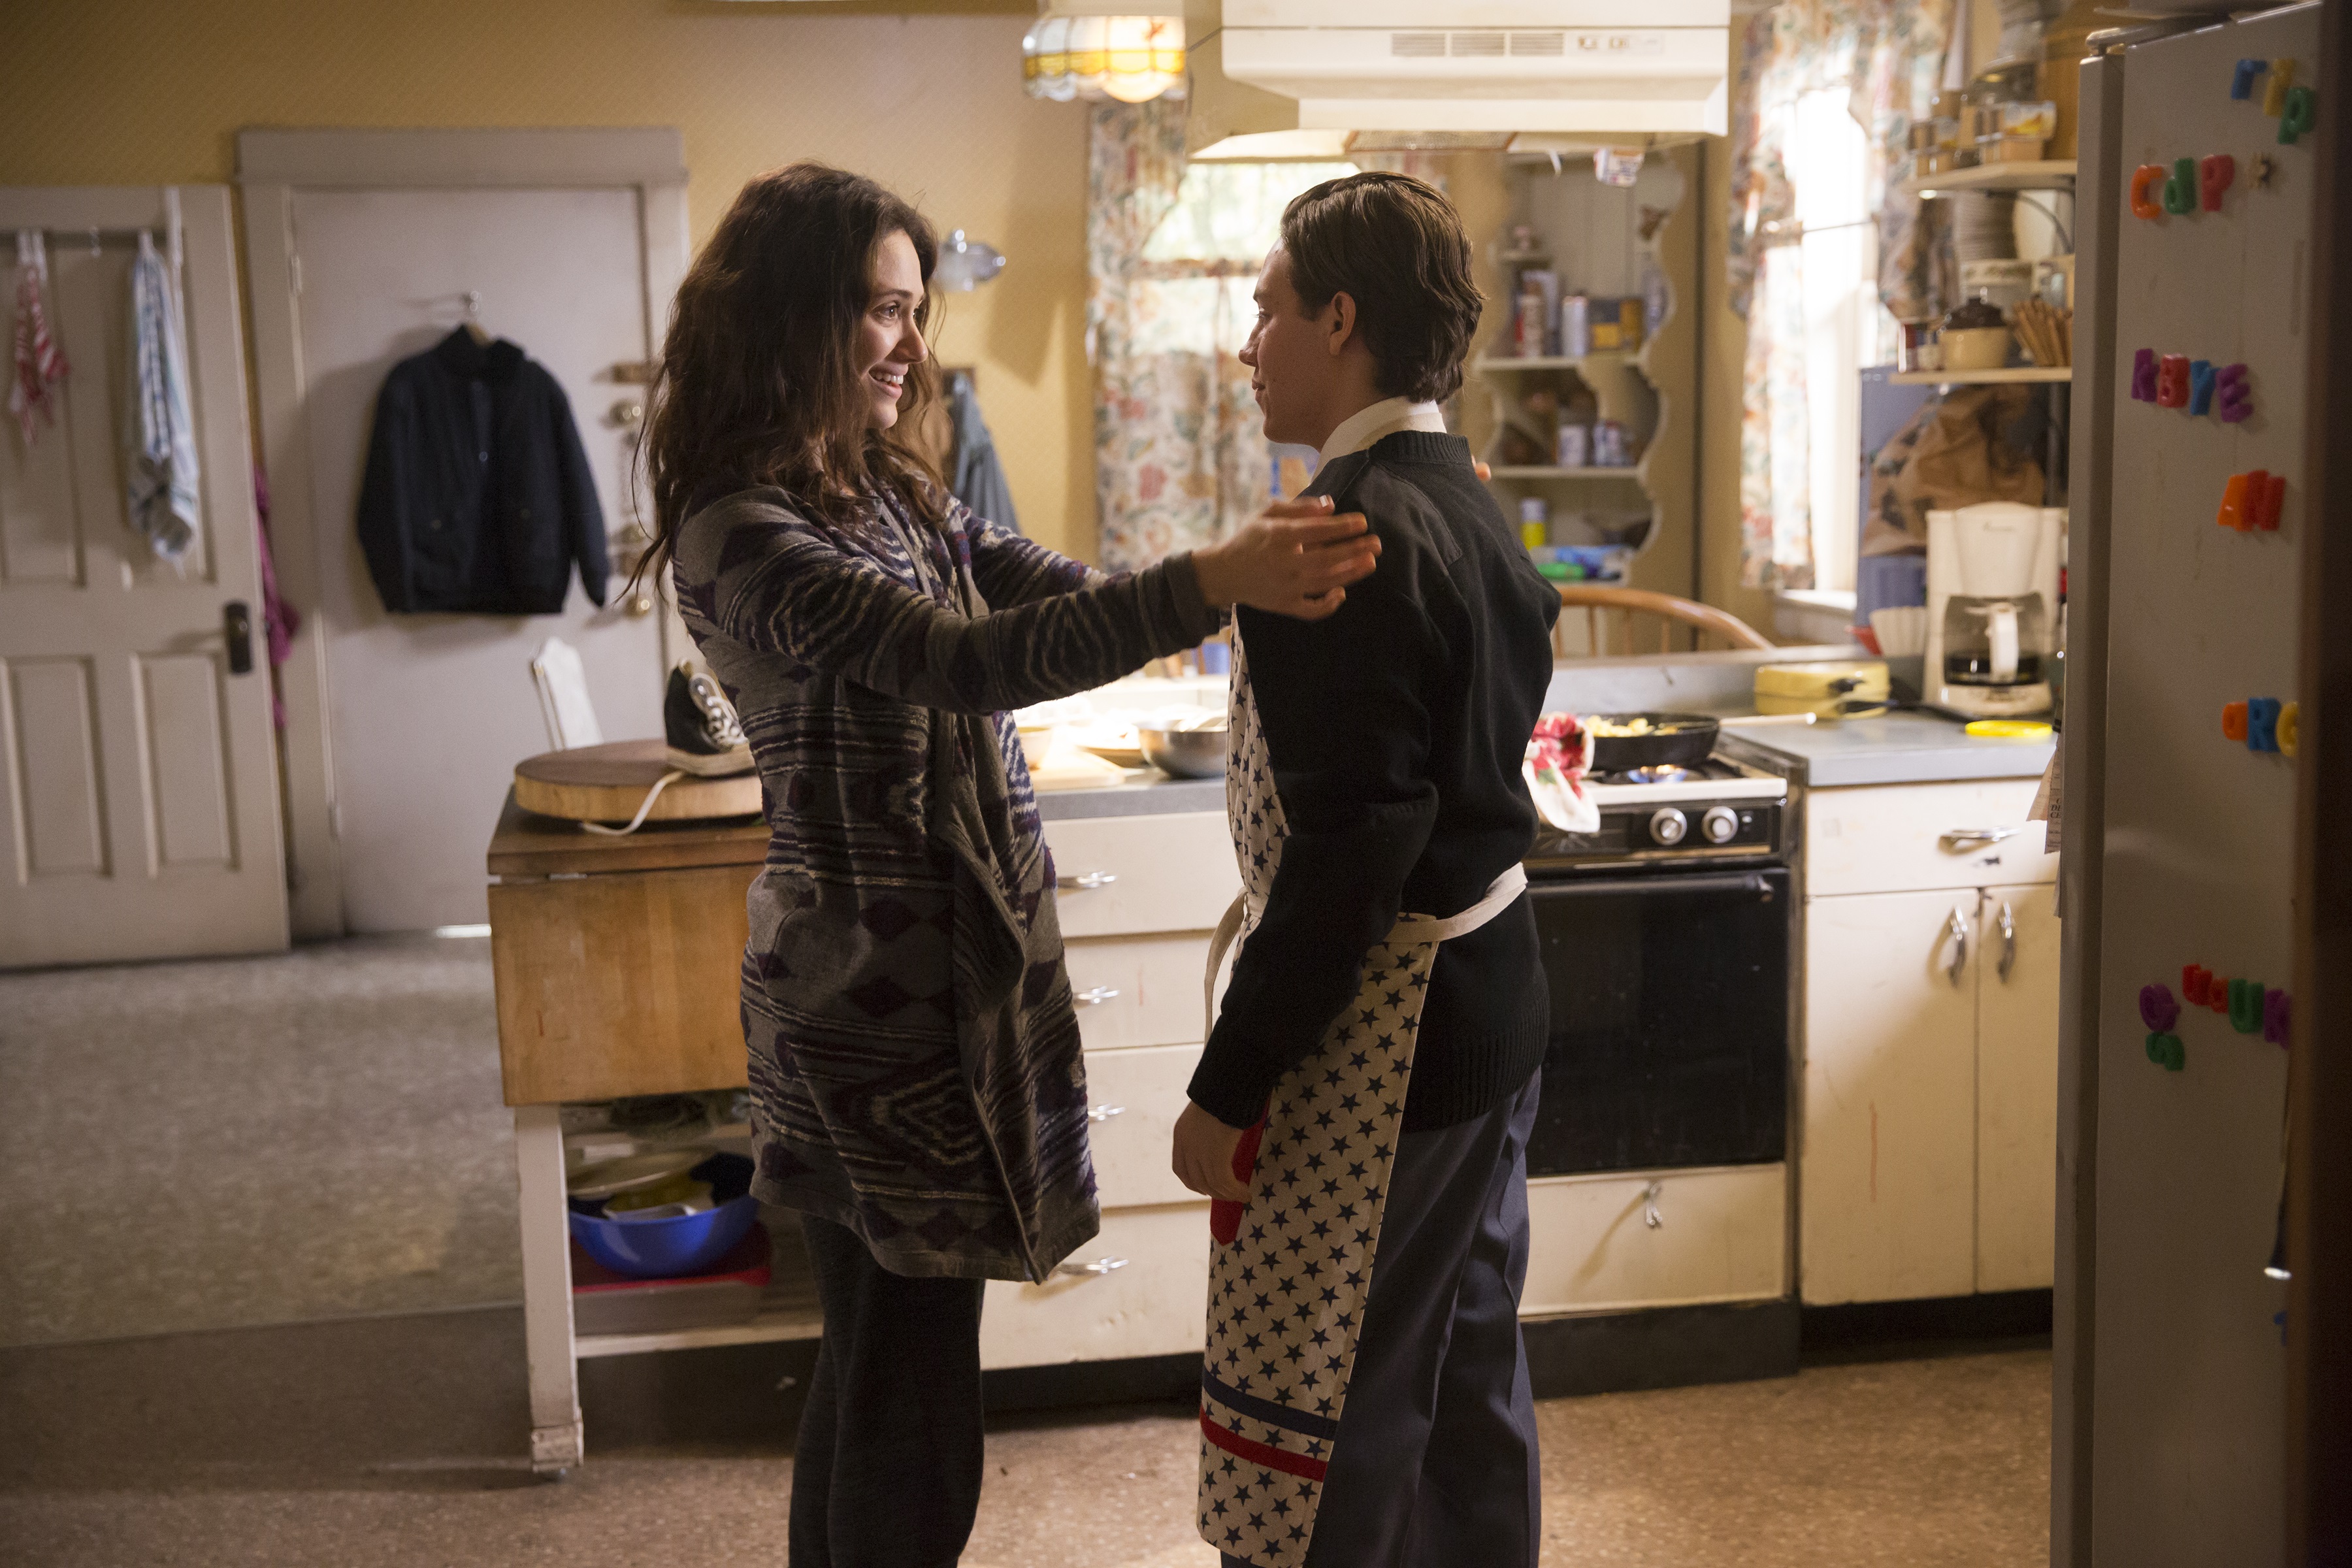 Emmy Rossum as Fiona Gallagher and Ethan Cutkosky as Carl Gallagher in Shameless